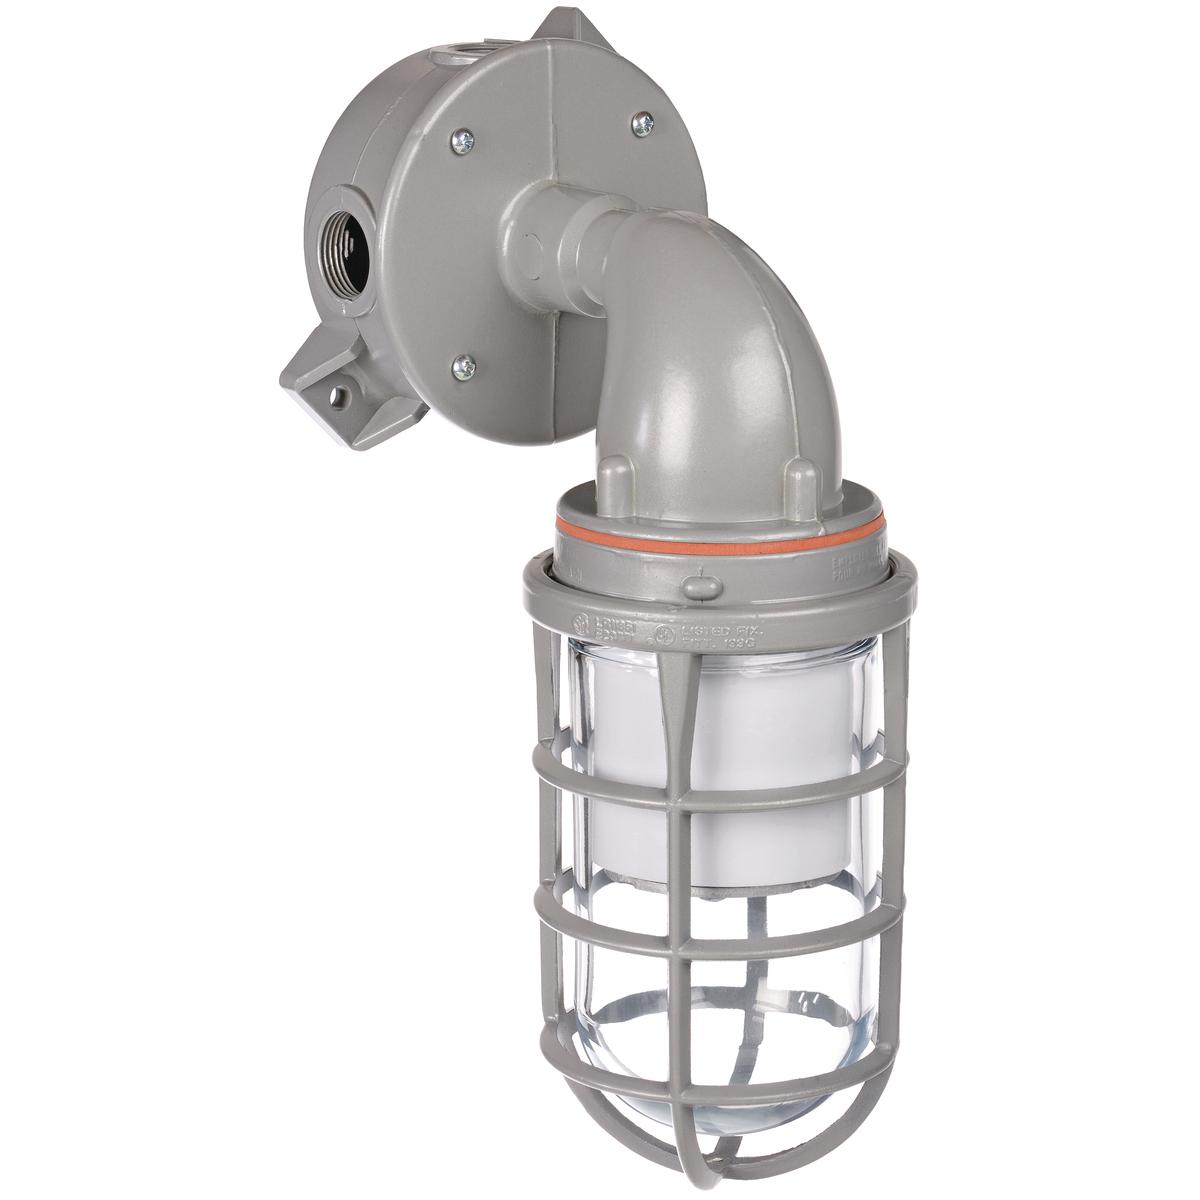 Hubbell VSL1330W2HG The VSL Series is a Vapor Tight/ Utility fixture using energy efficient LED's. This fixture is made with a cast copper-free aluminum housing and mount that is  suitable for harsh and hazardous environments. With the design of this fixtures internal heat s